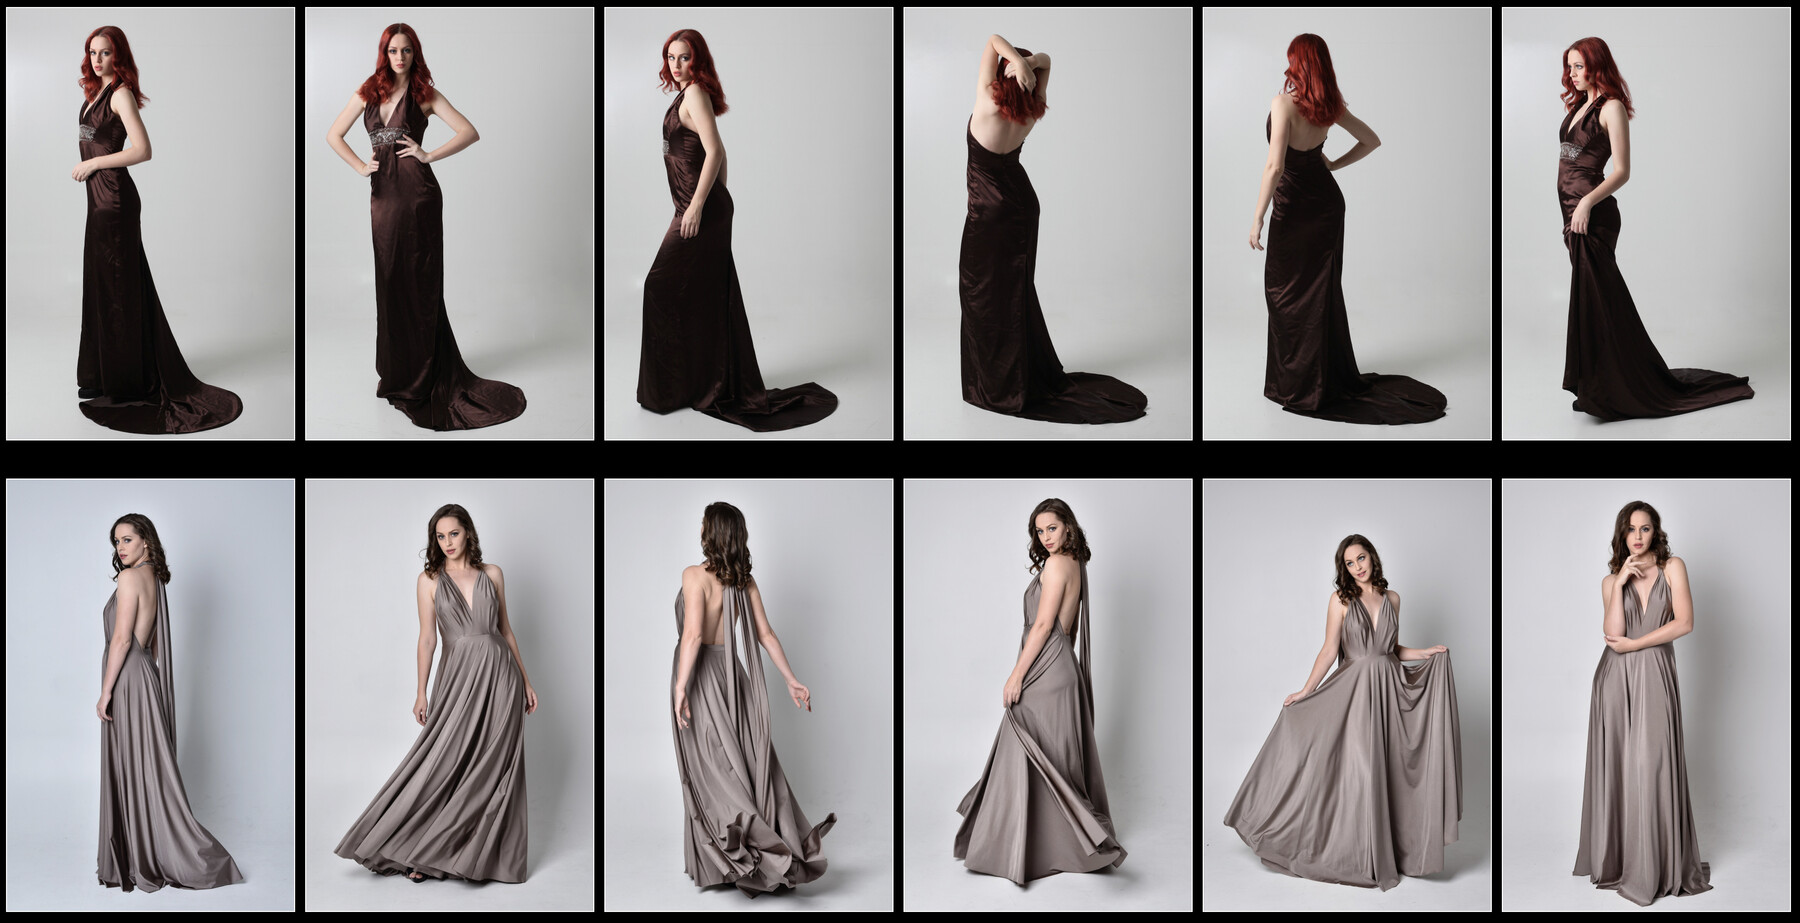 How To Pose In Long Flowy Dresses For Photoshoots